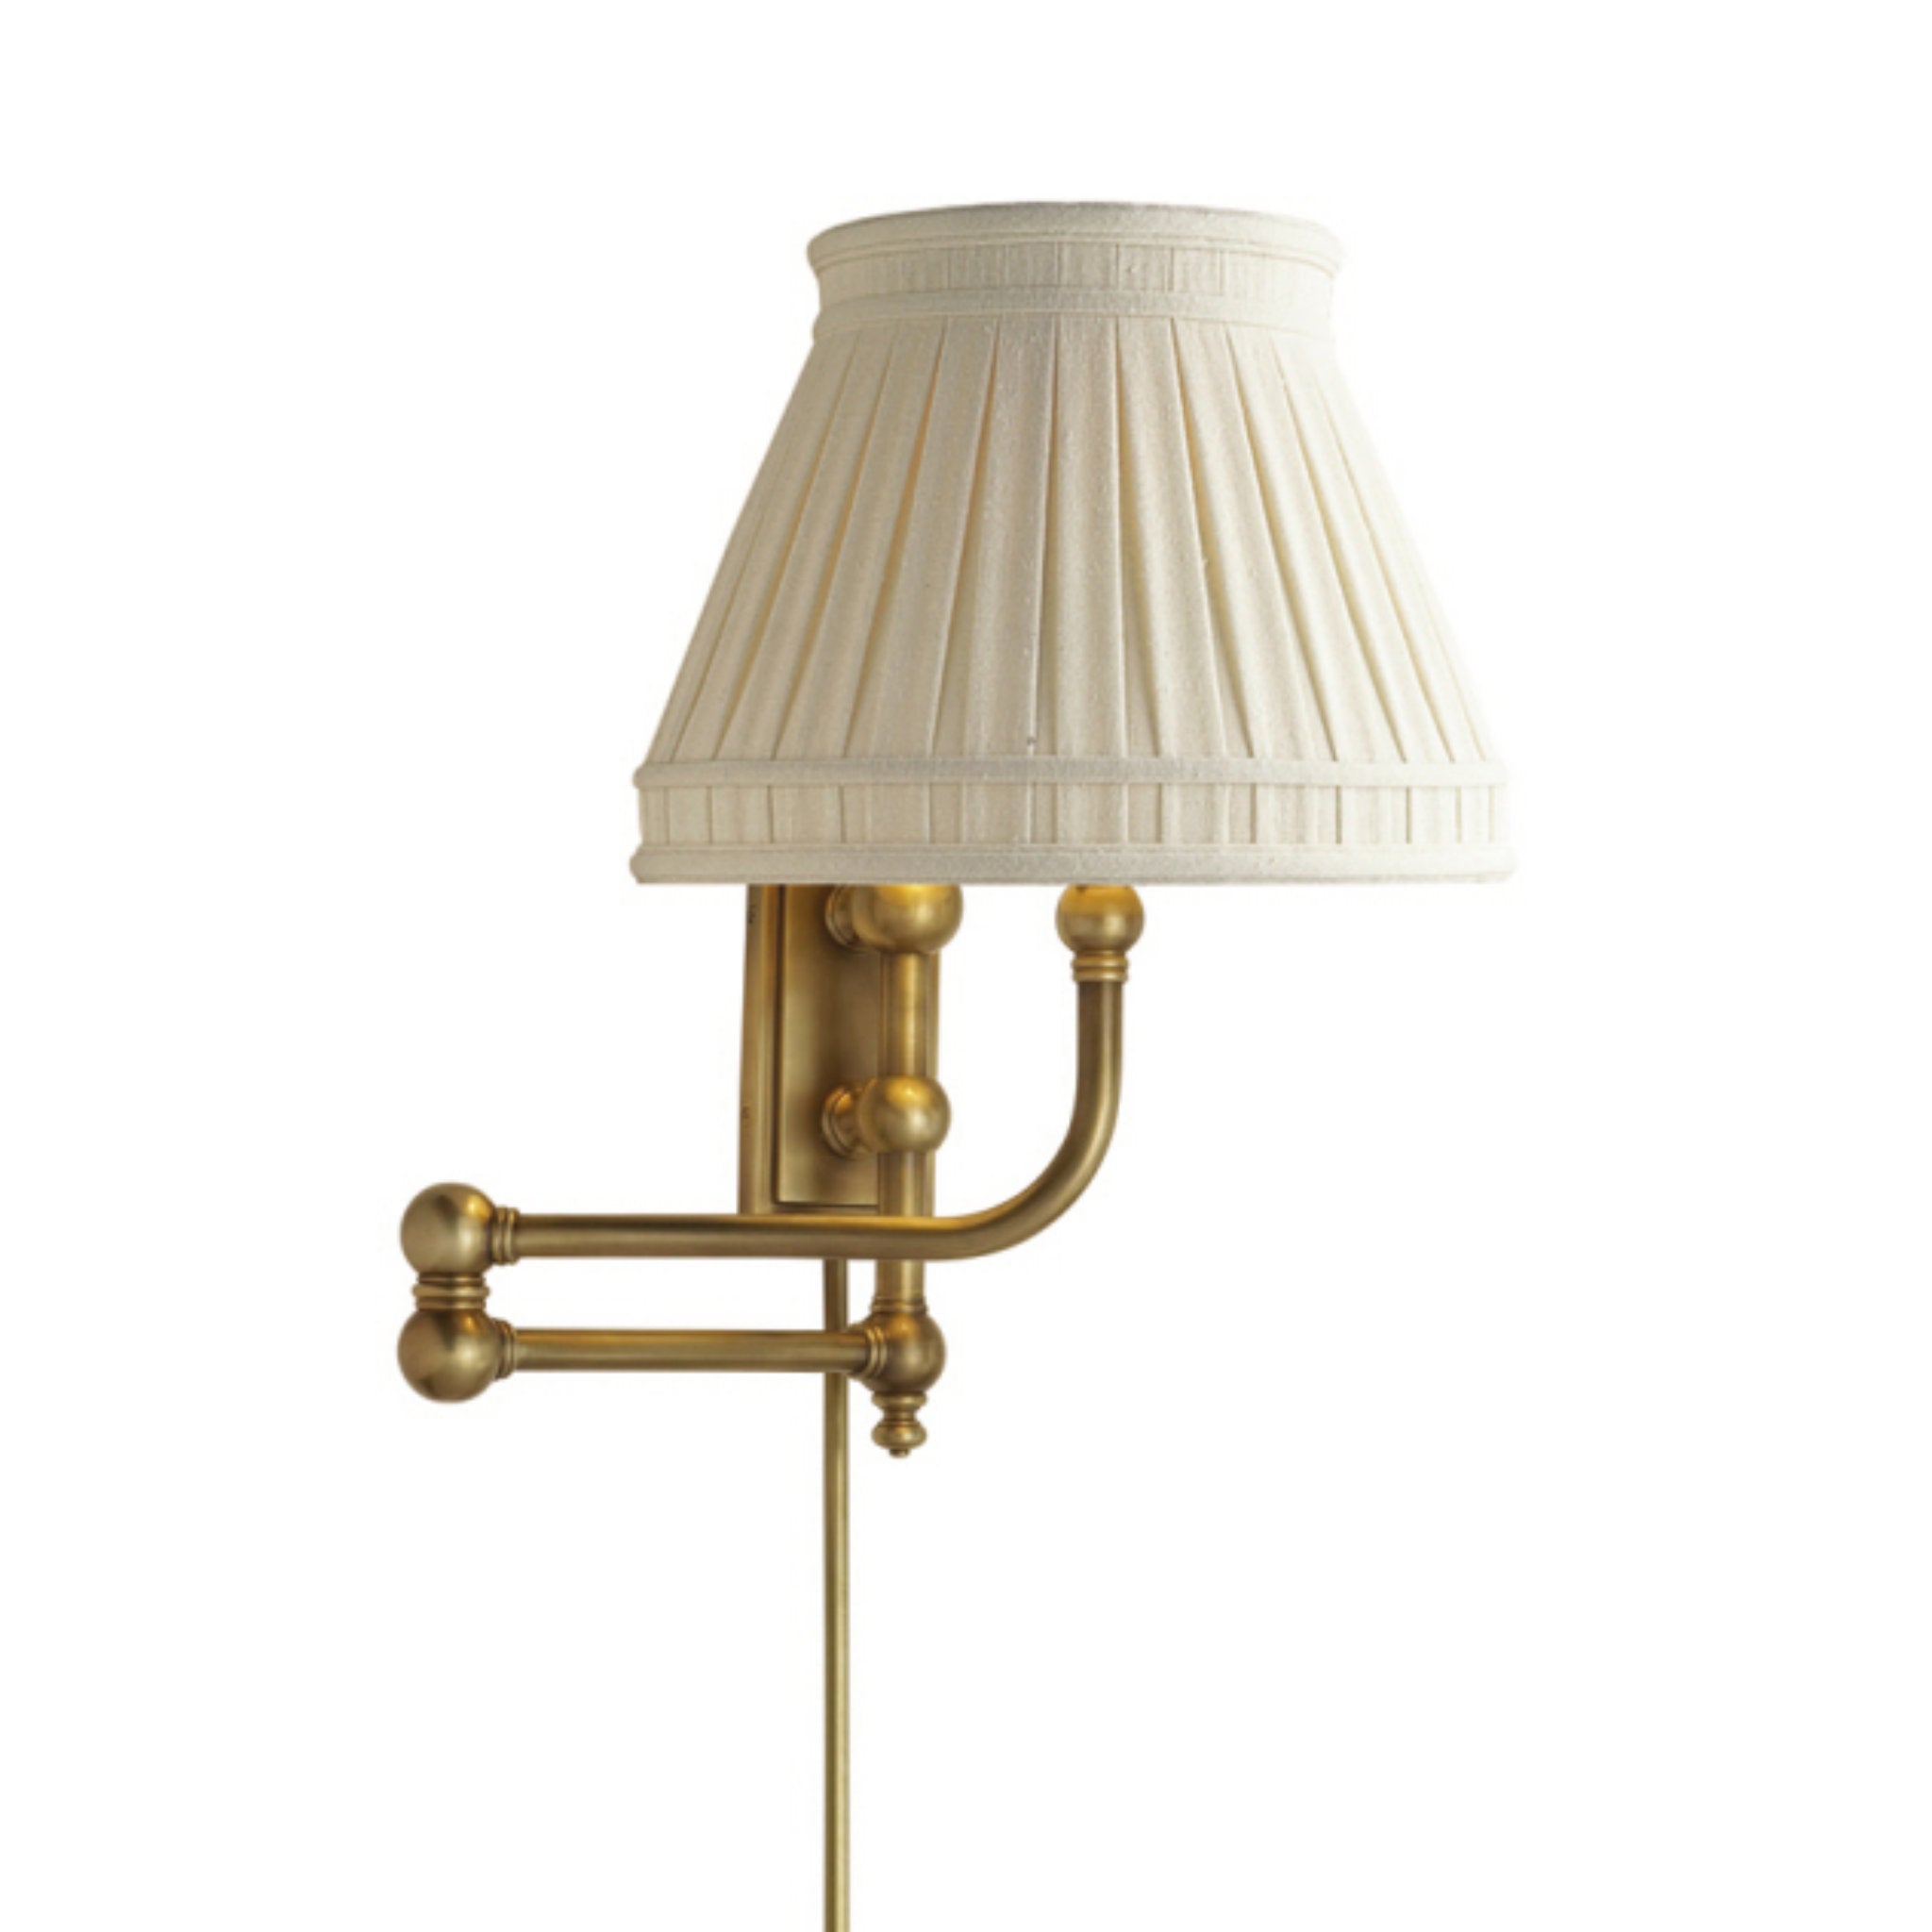 Chapman & Myers Pimlico Swing Arm in Antique-Burnished Brass with Linen Collar Shade